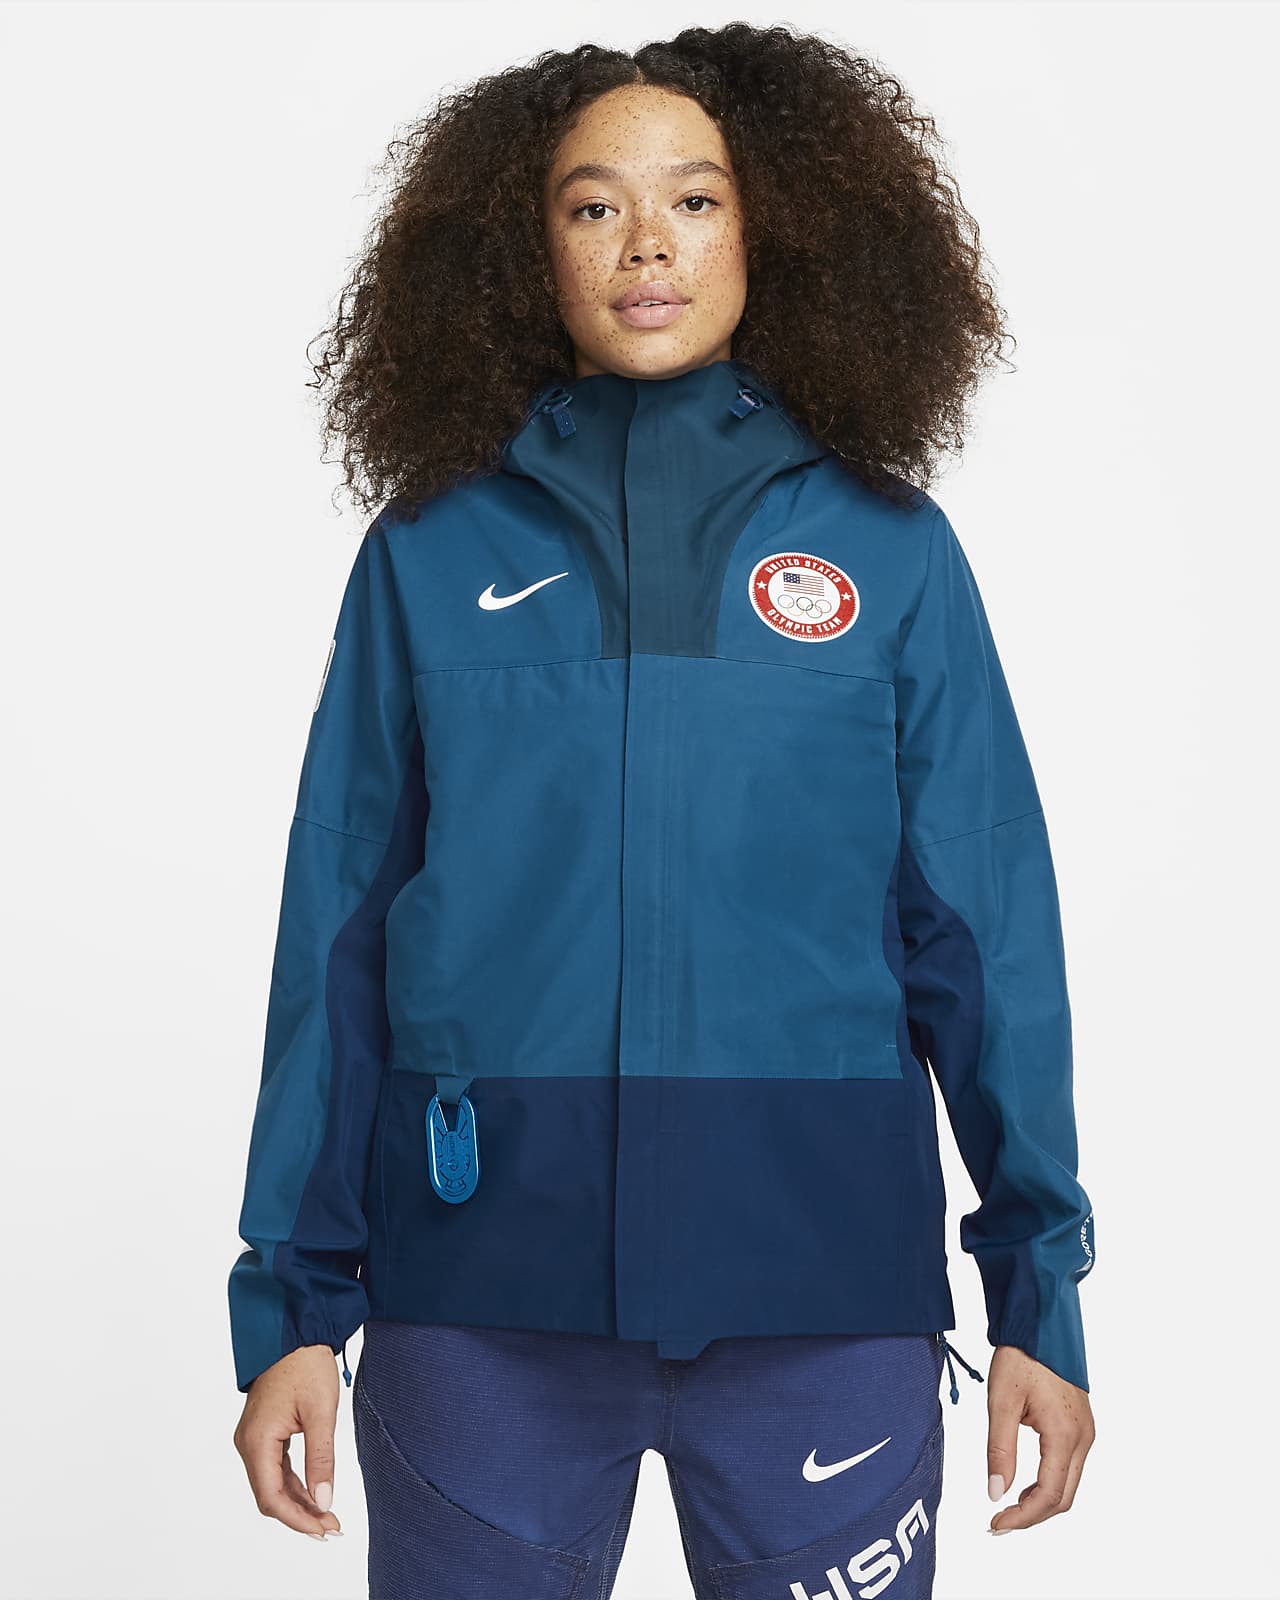 Nike ACG Storm-FIT ADV Chain of Craters Women's Jacket.